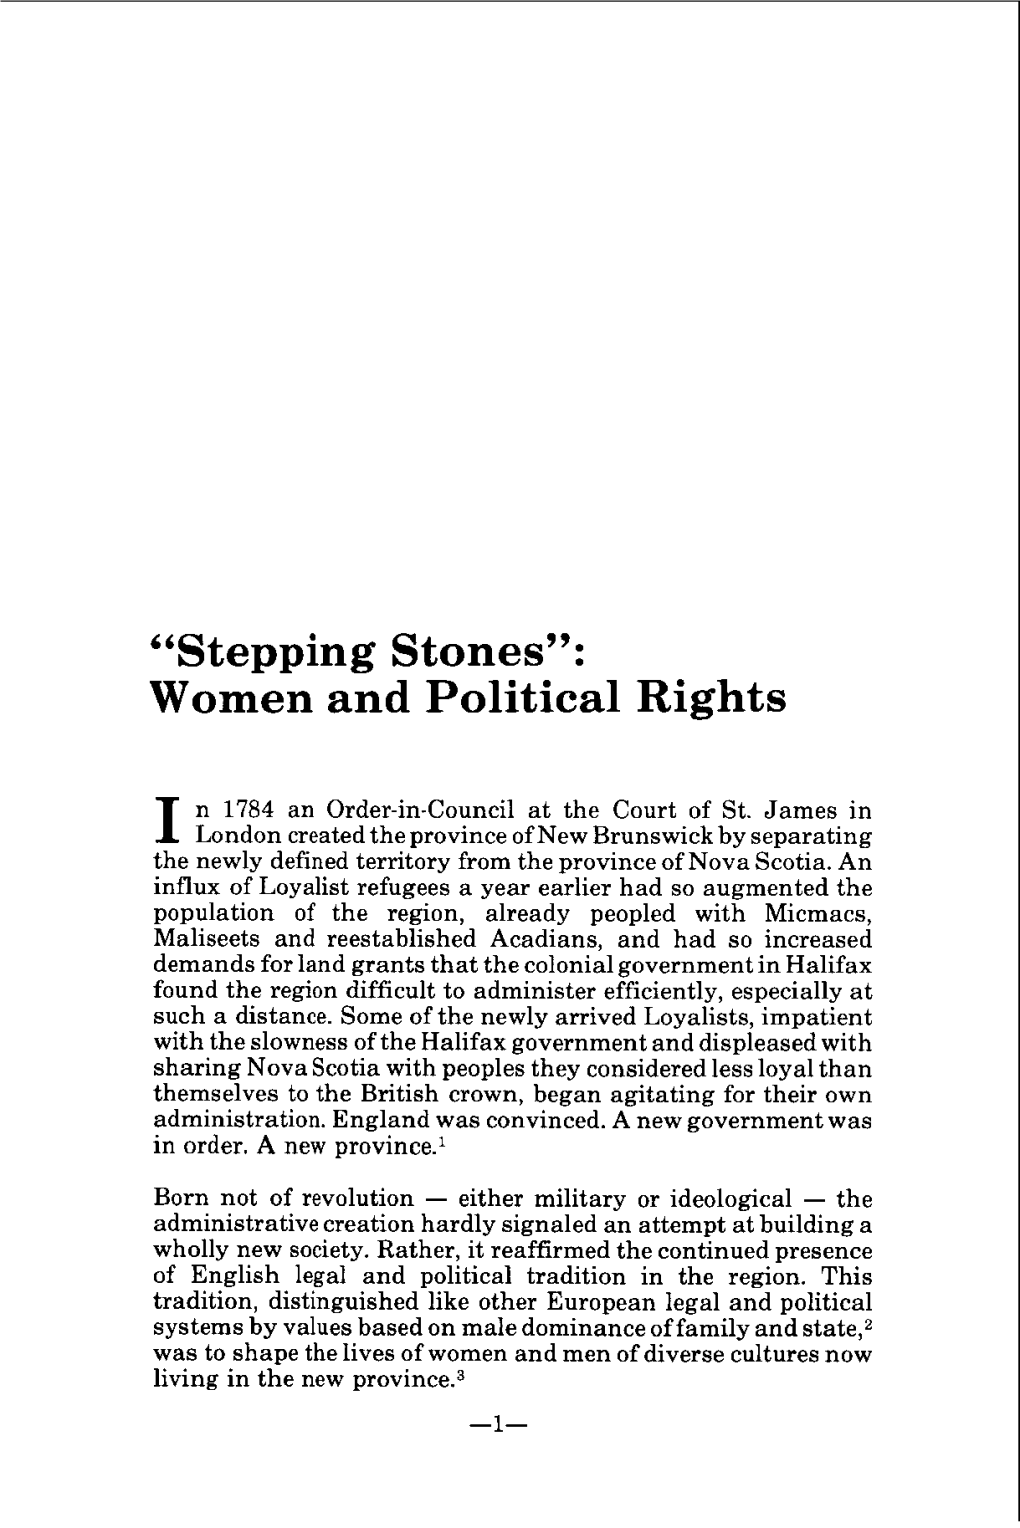 Stepping Stones": Women and Political Rights